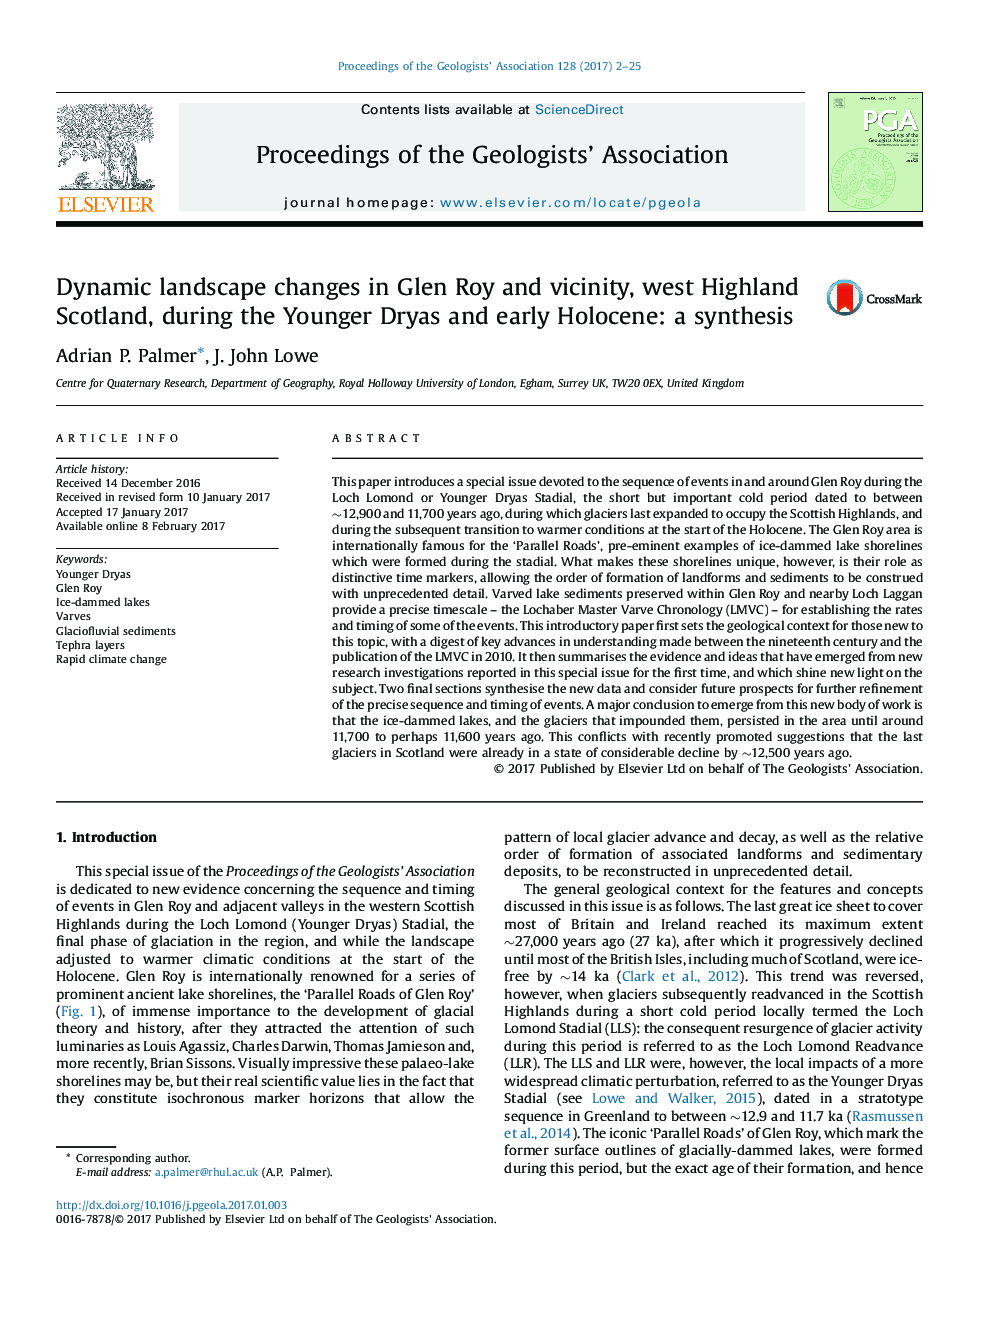 Dynamic landscape changes in Glen Roy and vicinity, west Highland Scotland, during the Younger Dryas and early Holocene: a synthesis